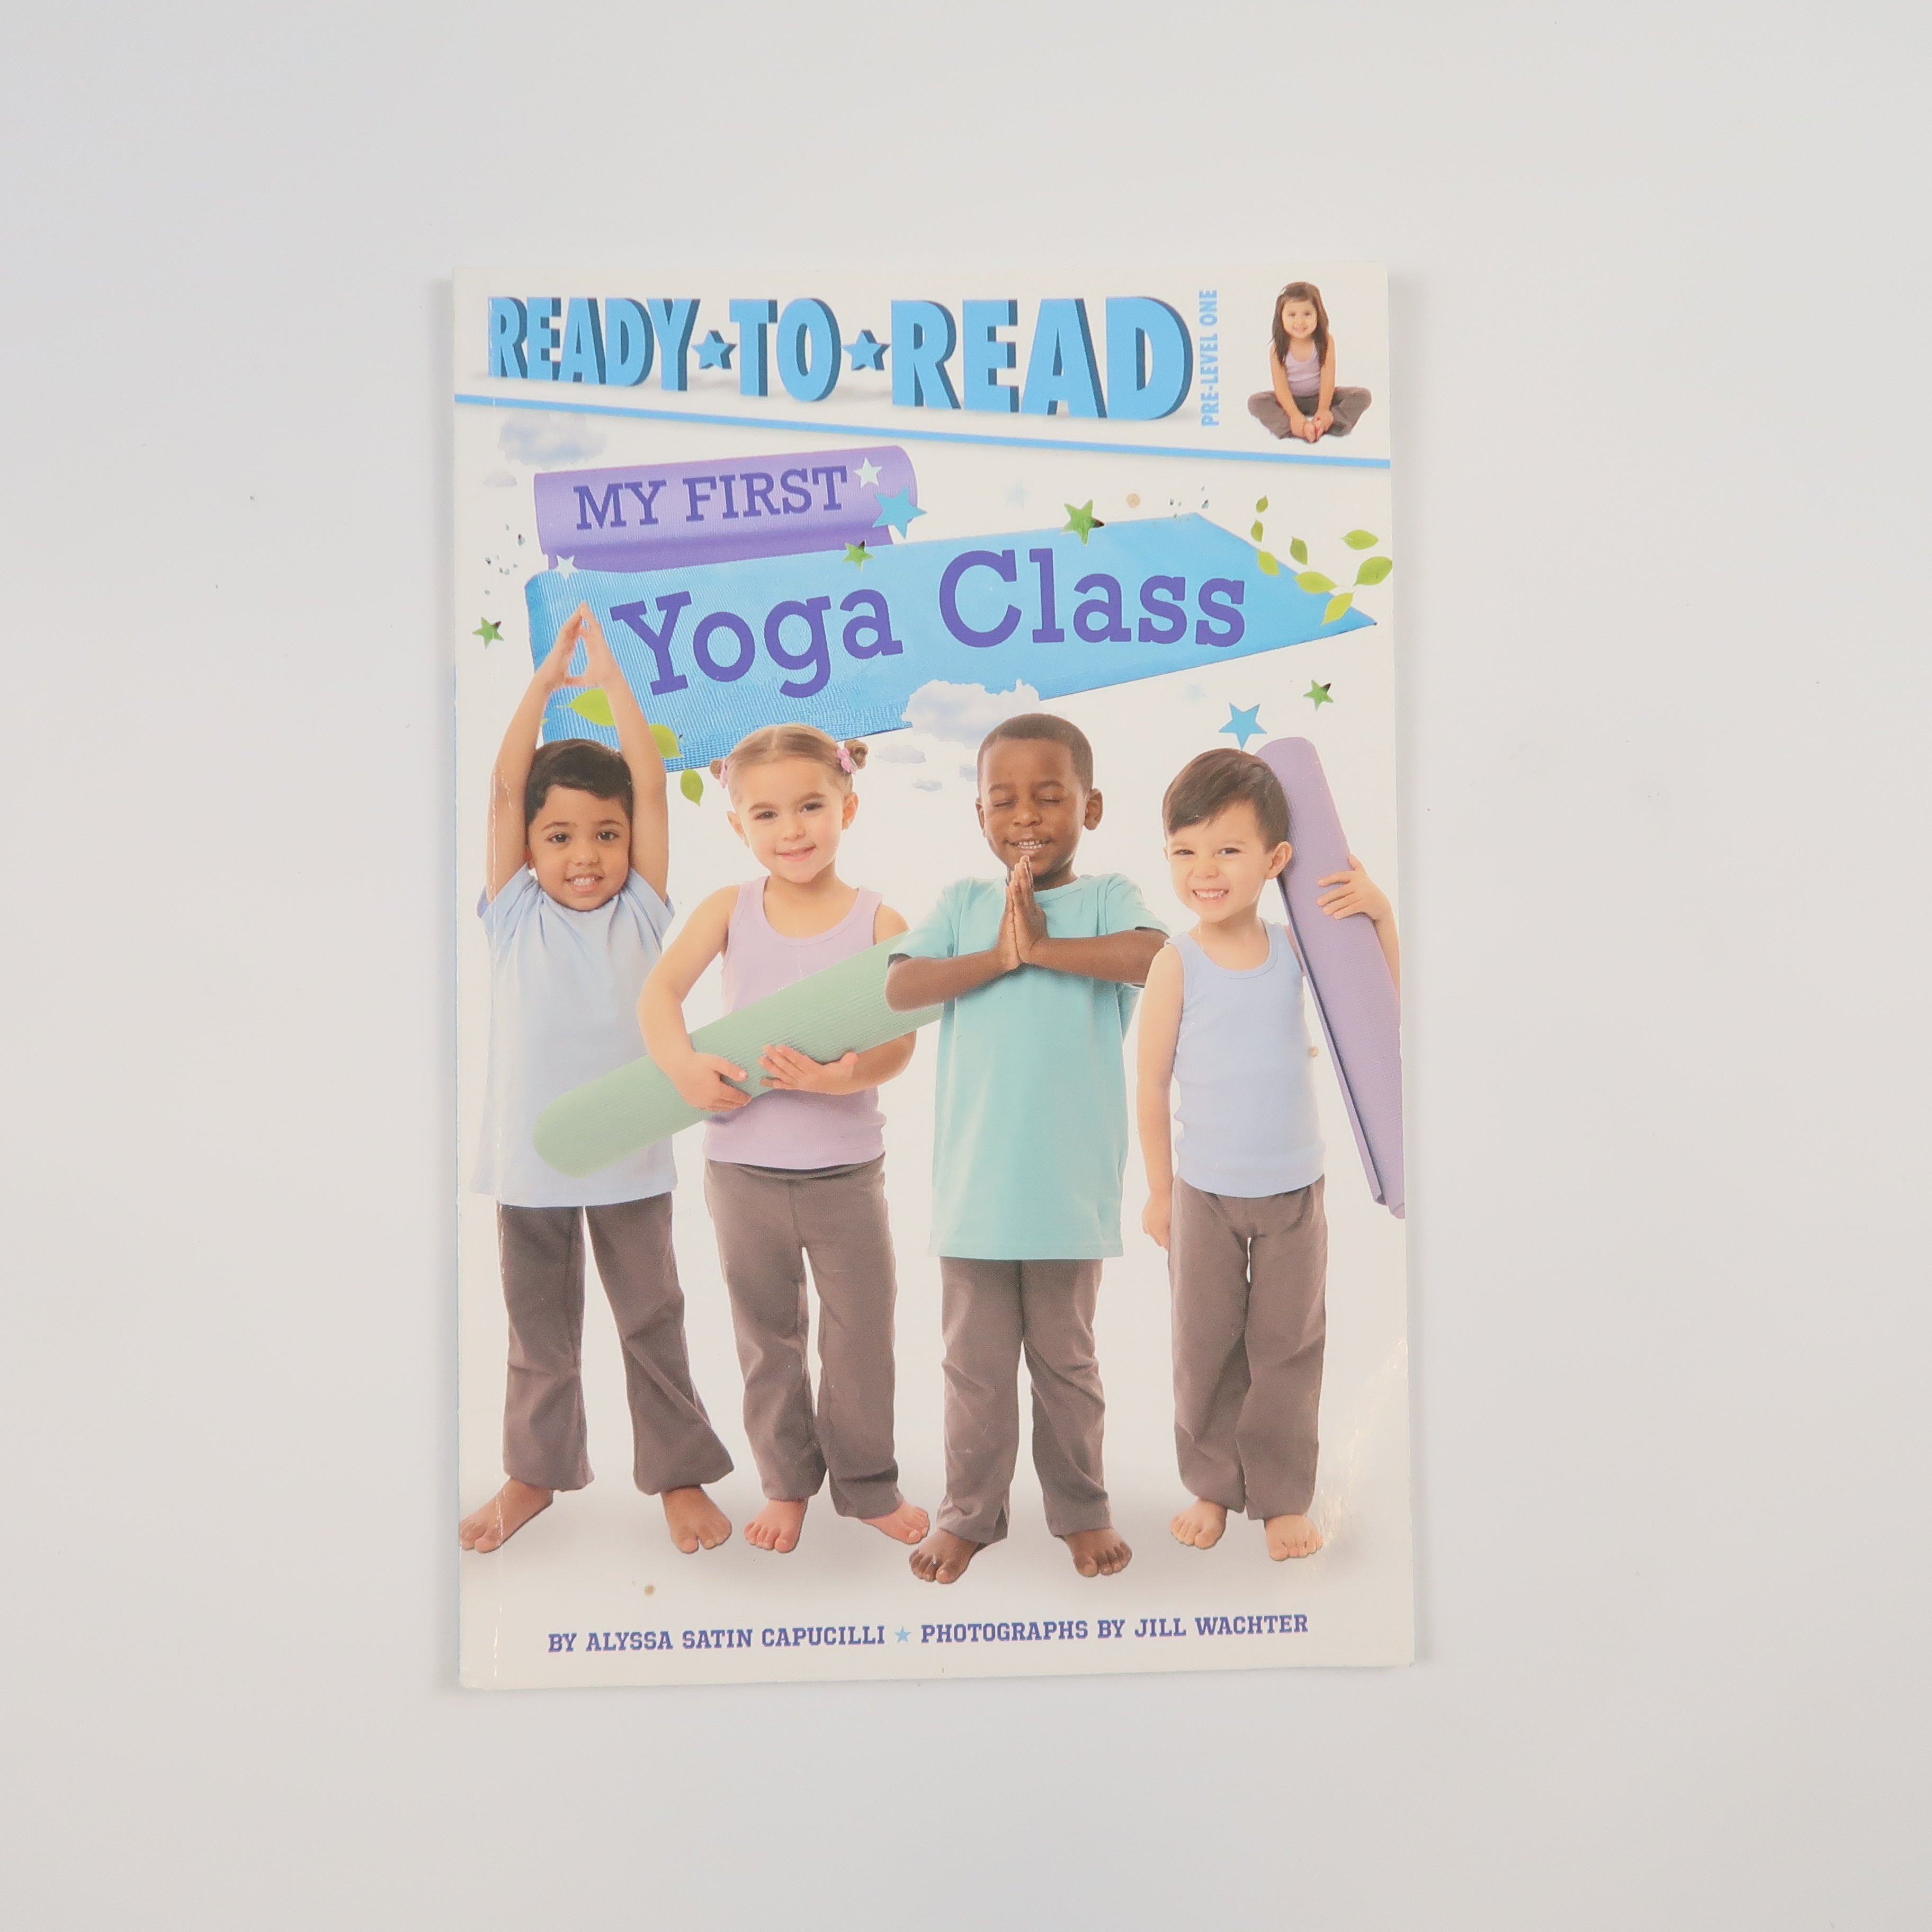 Ready to Read - My First Yoga Class